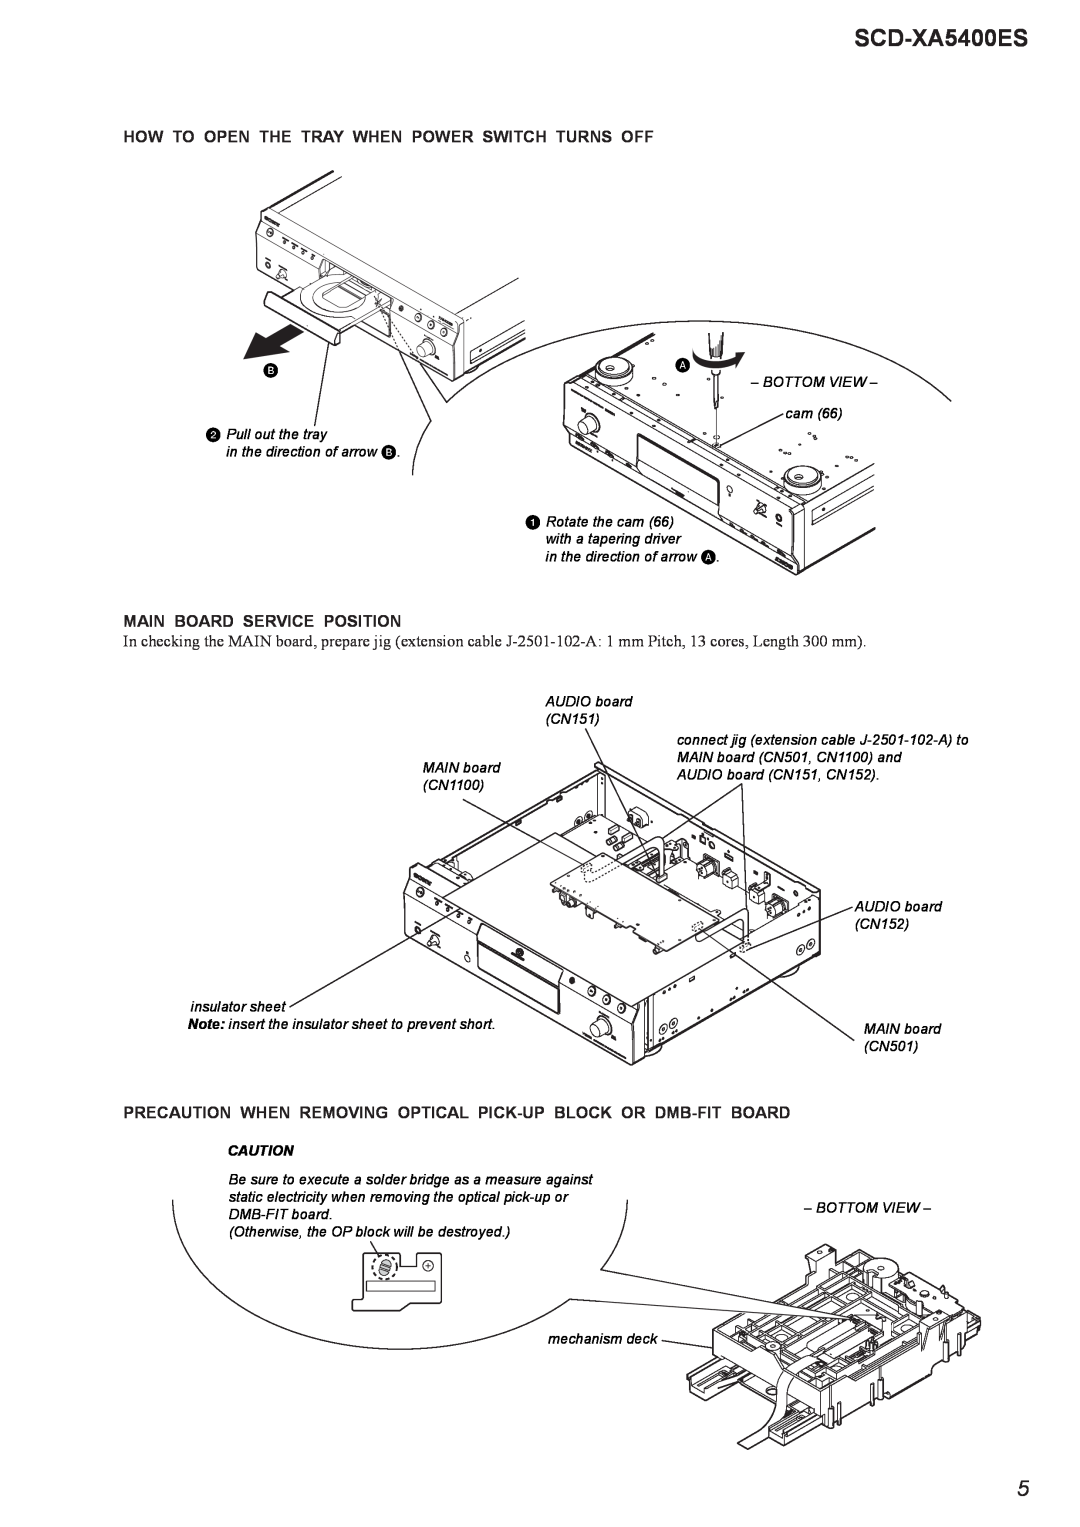 Sony 2008H05-1 service manual SCD-XA5400ES, How To Open The Tray When Power Switch Turns Off, Main Board Service Position 